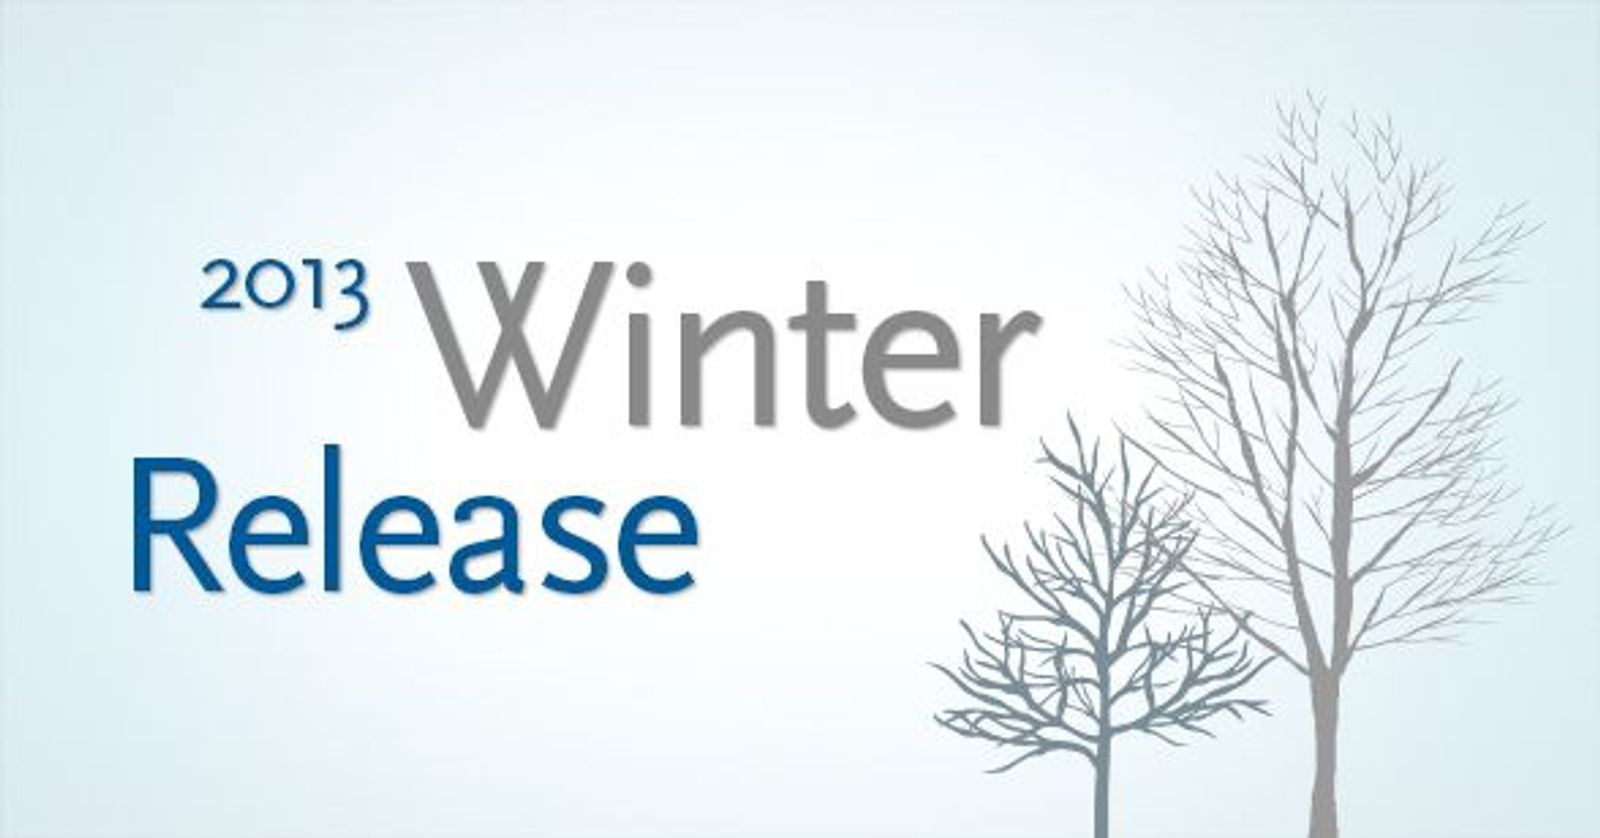 Introducing Our Winter 2013 Release:   Make Recruiting Modern & Relevant